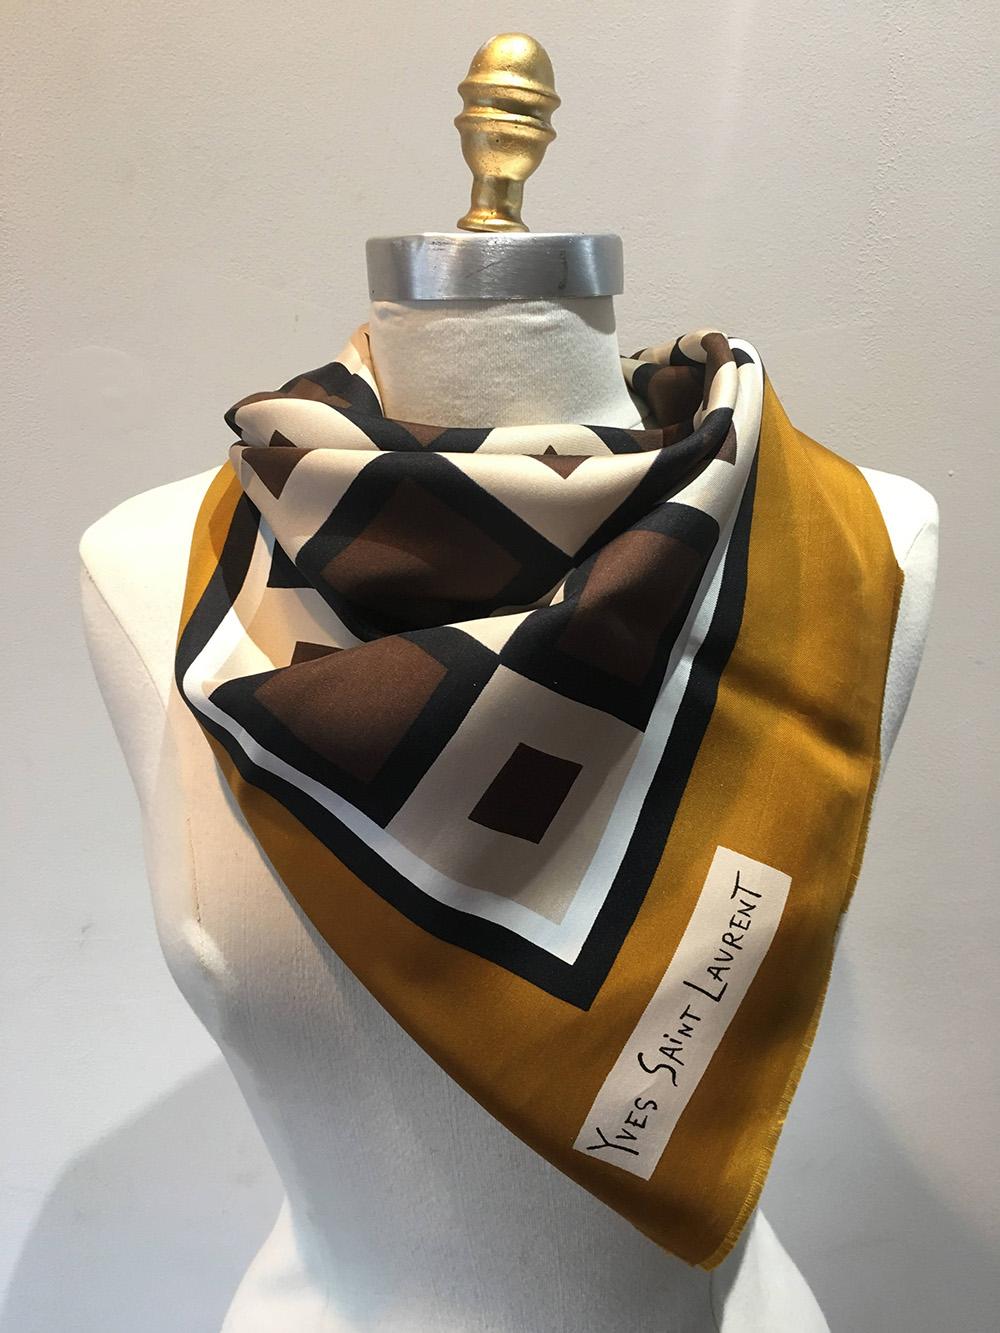 Vintage Yves Saint Laurent Golden Checkered Silk Scarf in very good condition. Woven silk twill with mid century modern retro print featuring dark golden border surrounding a centered brown, black and cream square checkered print. 100% silk. made in